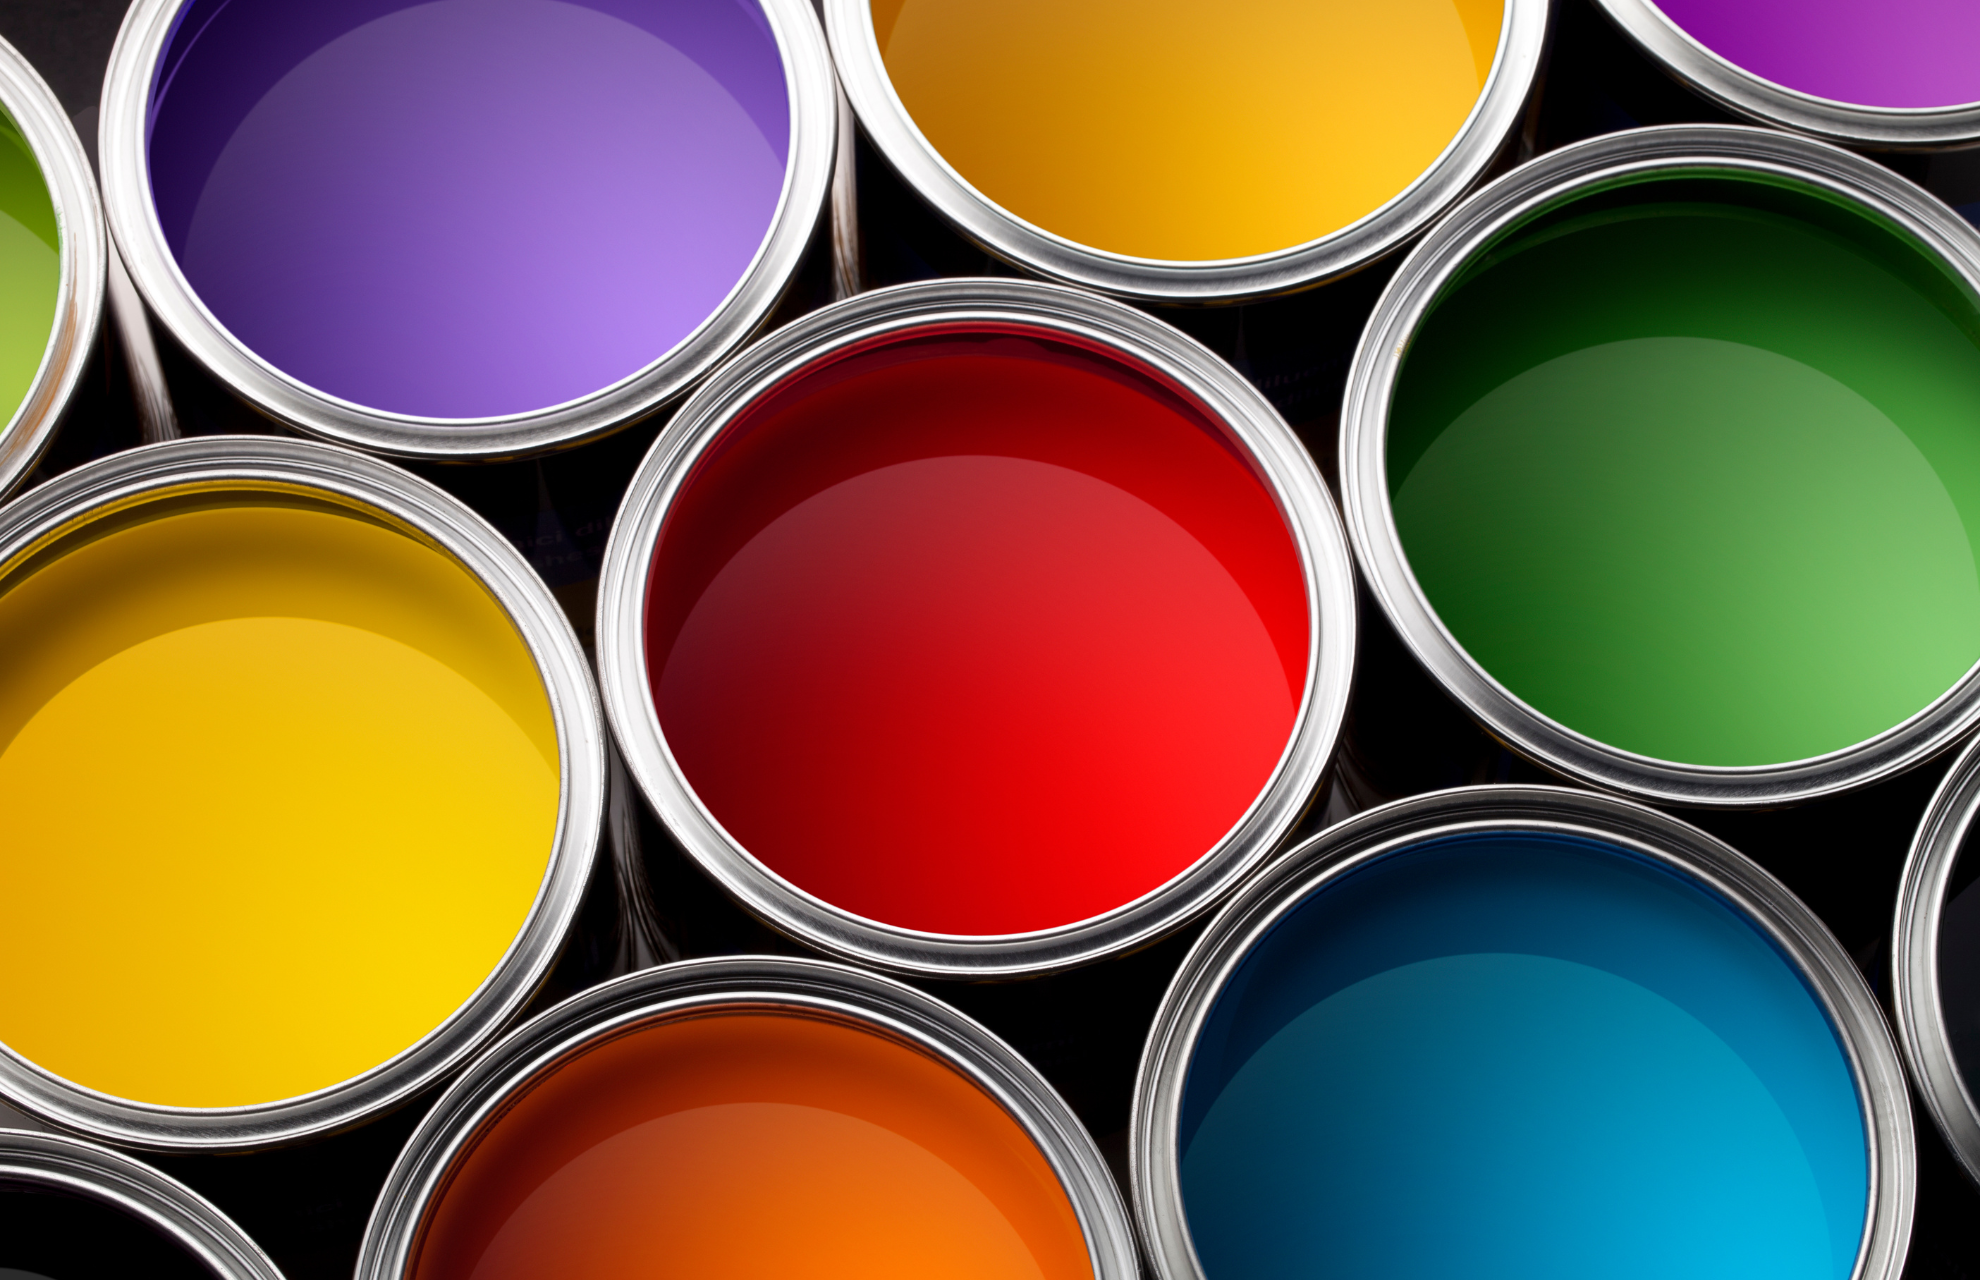 Paint cans containing different color of paints